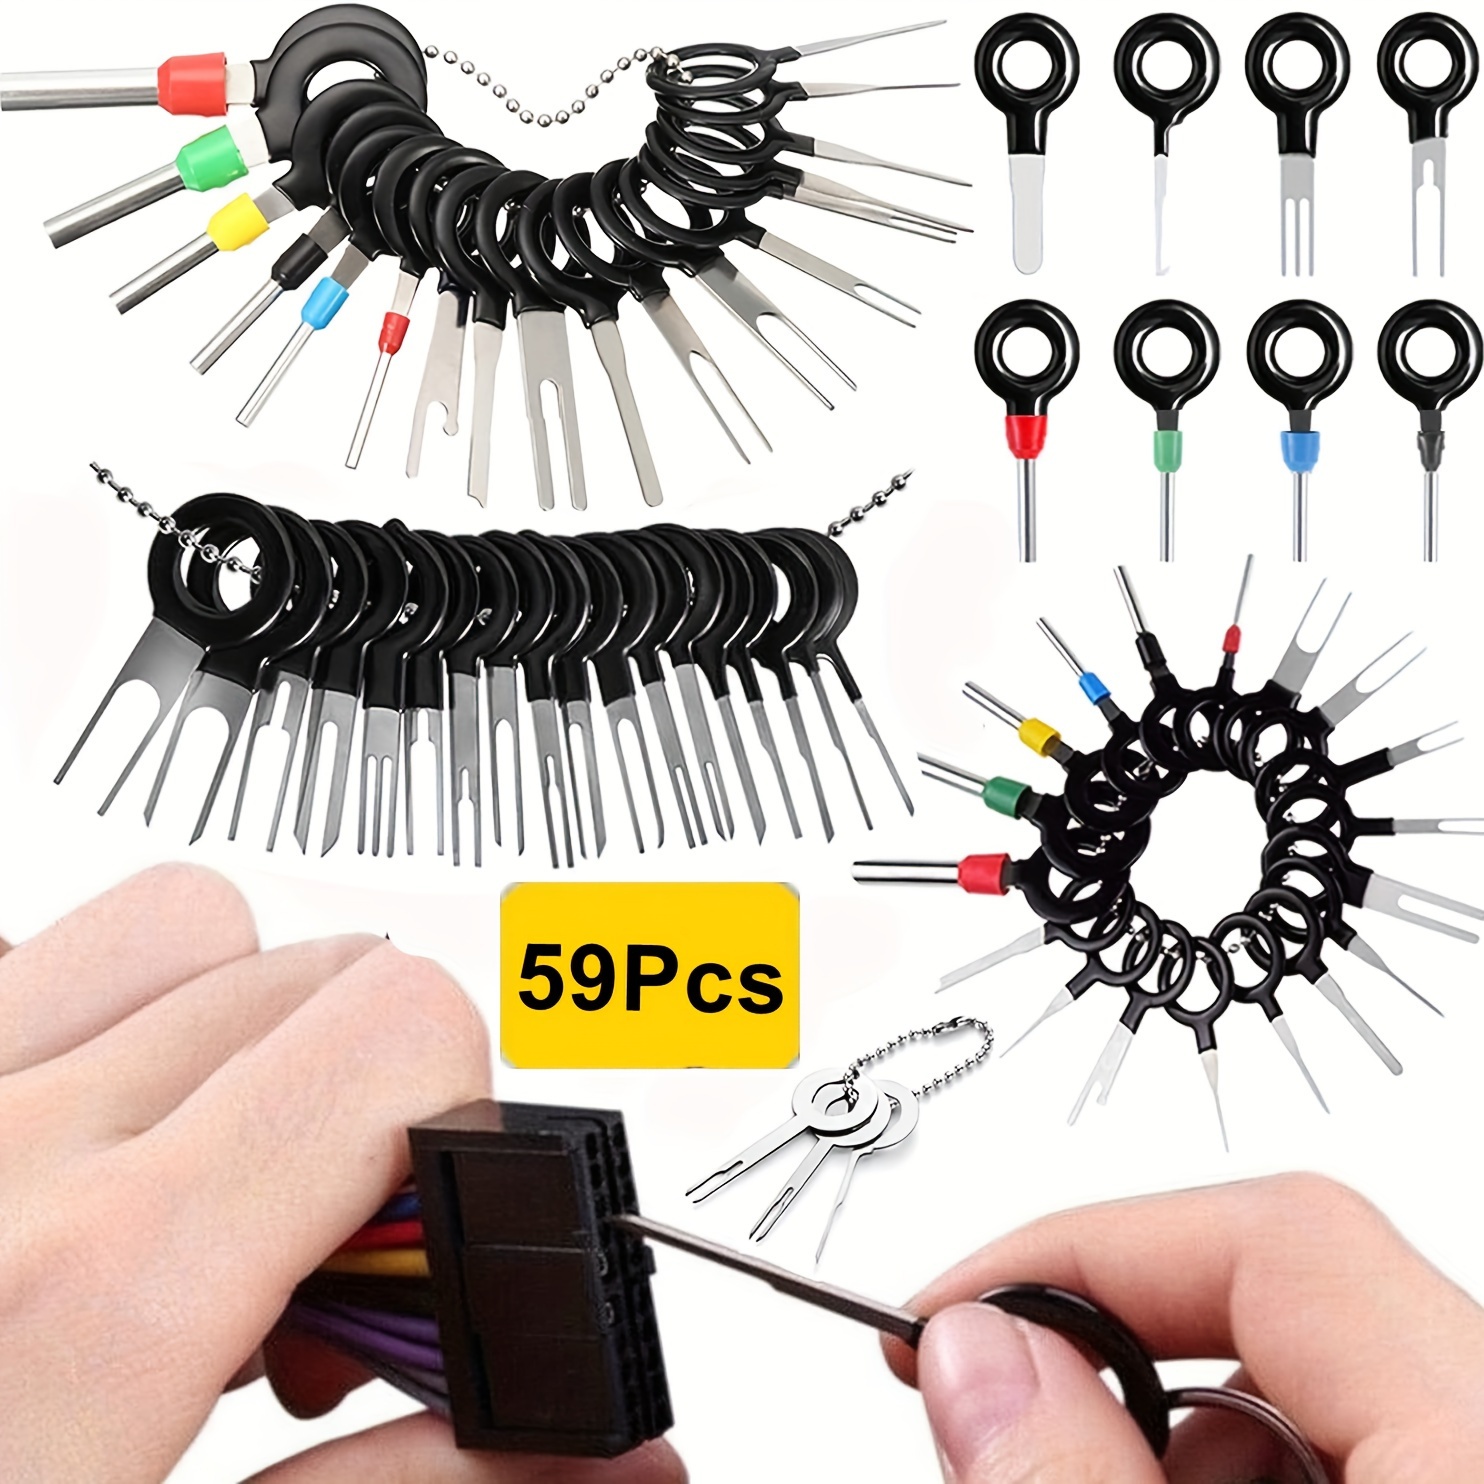 76Pcs Terminal Removal Tool Kit with Wire Stripper, Zambia